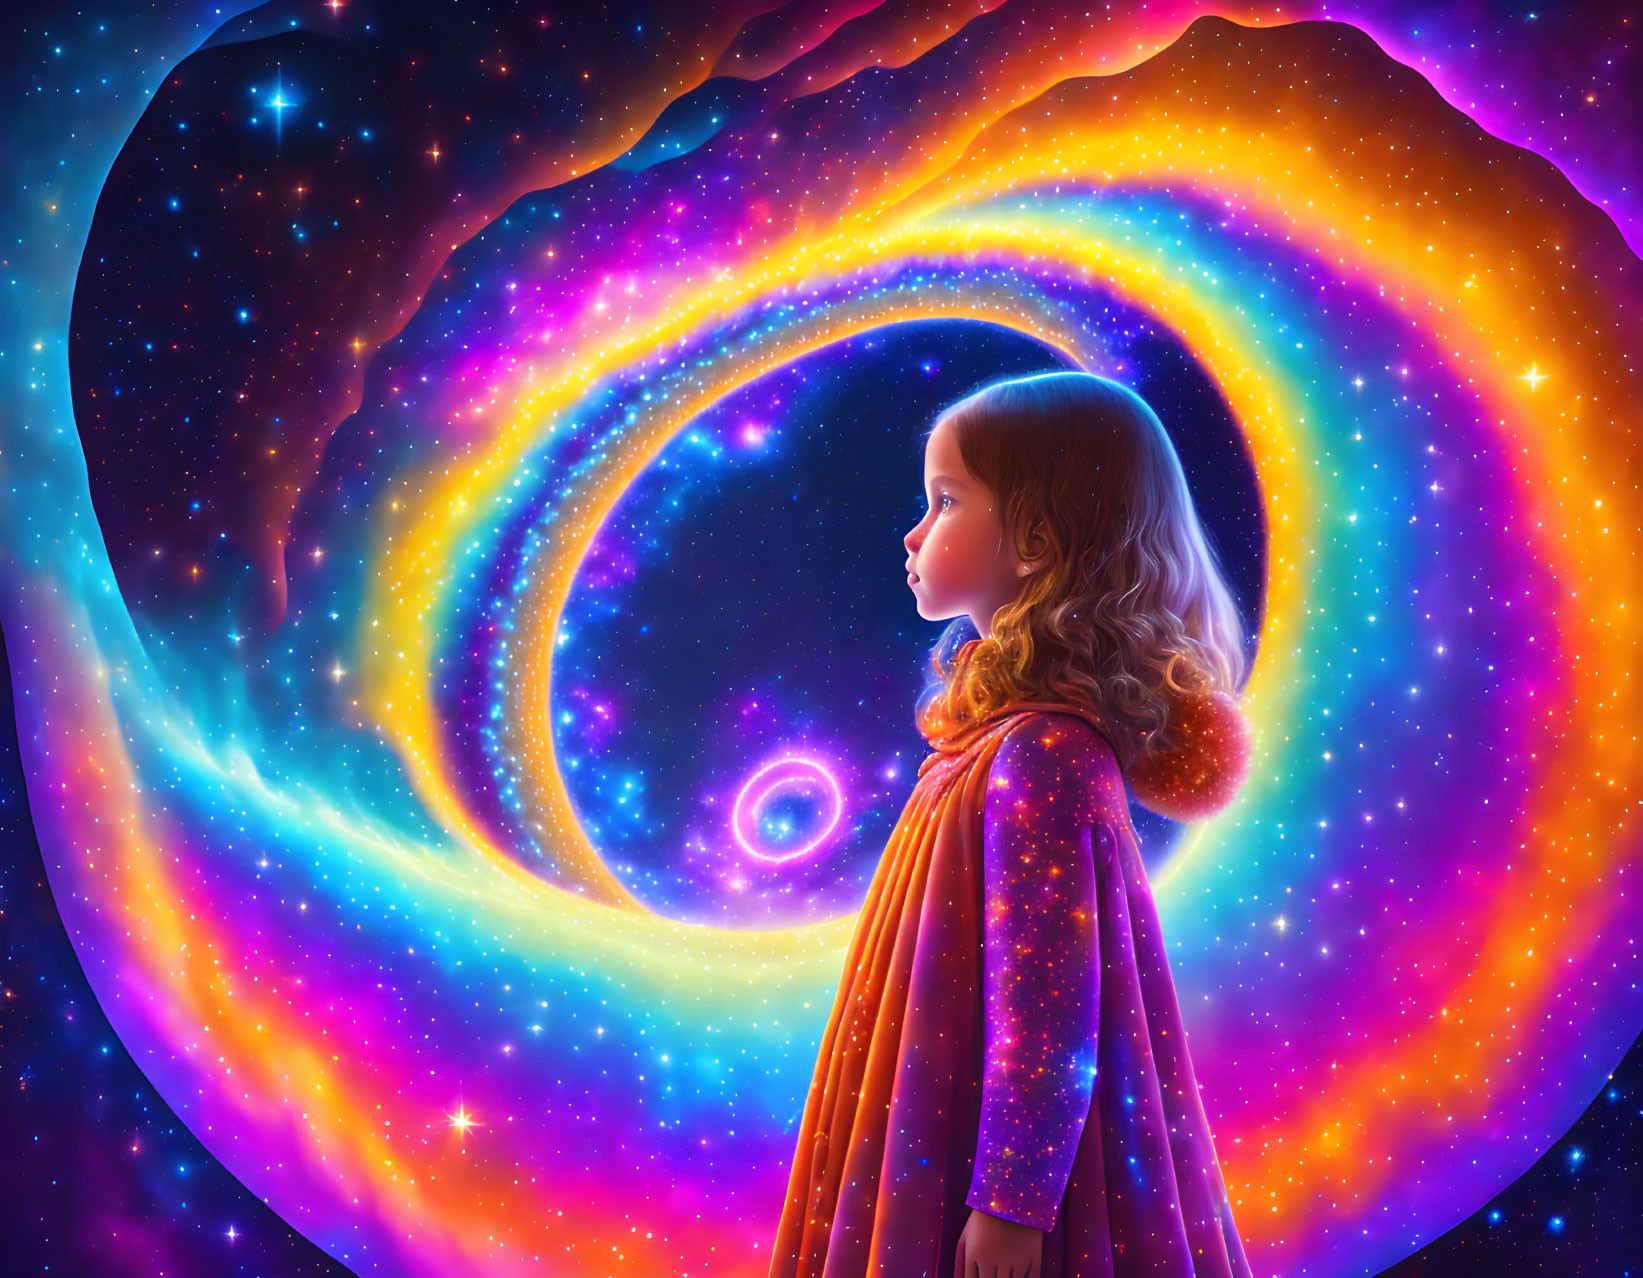 Young girl mesmerized by cosmic swirl of stars and neon colors